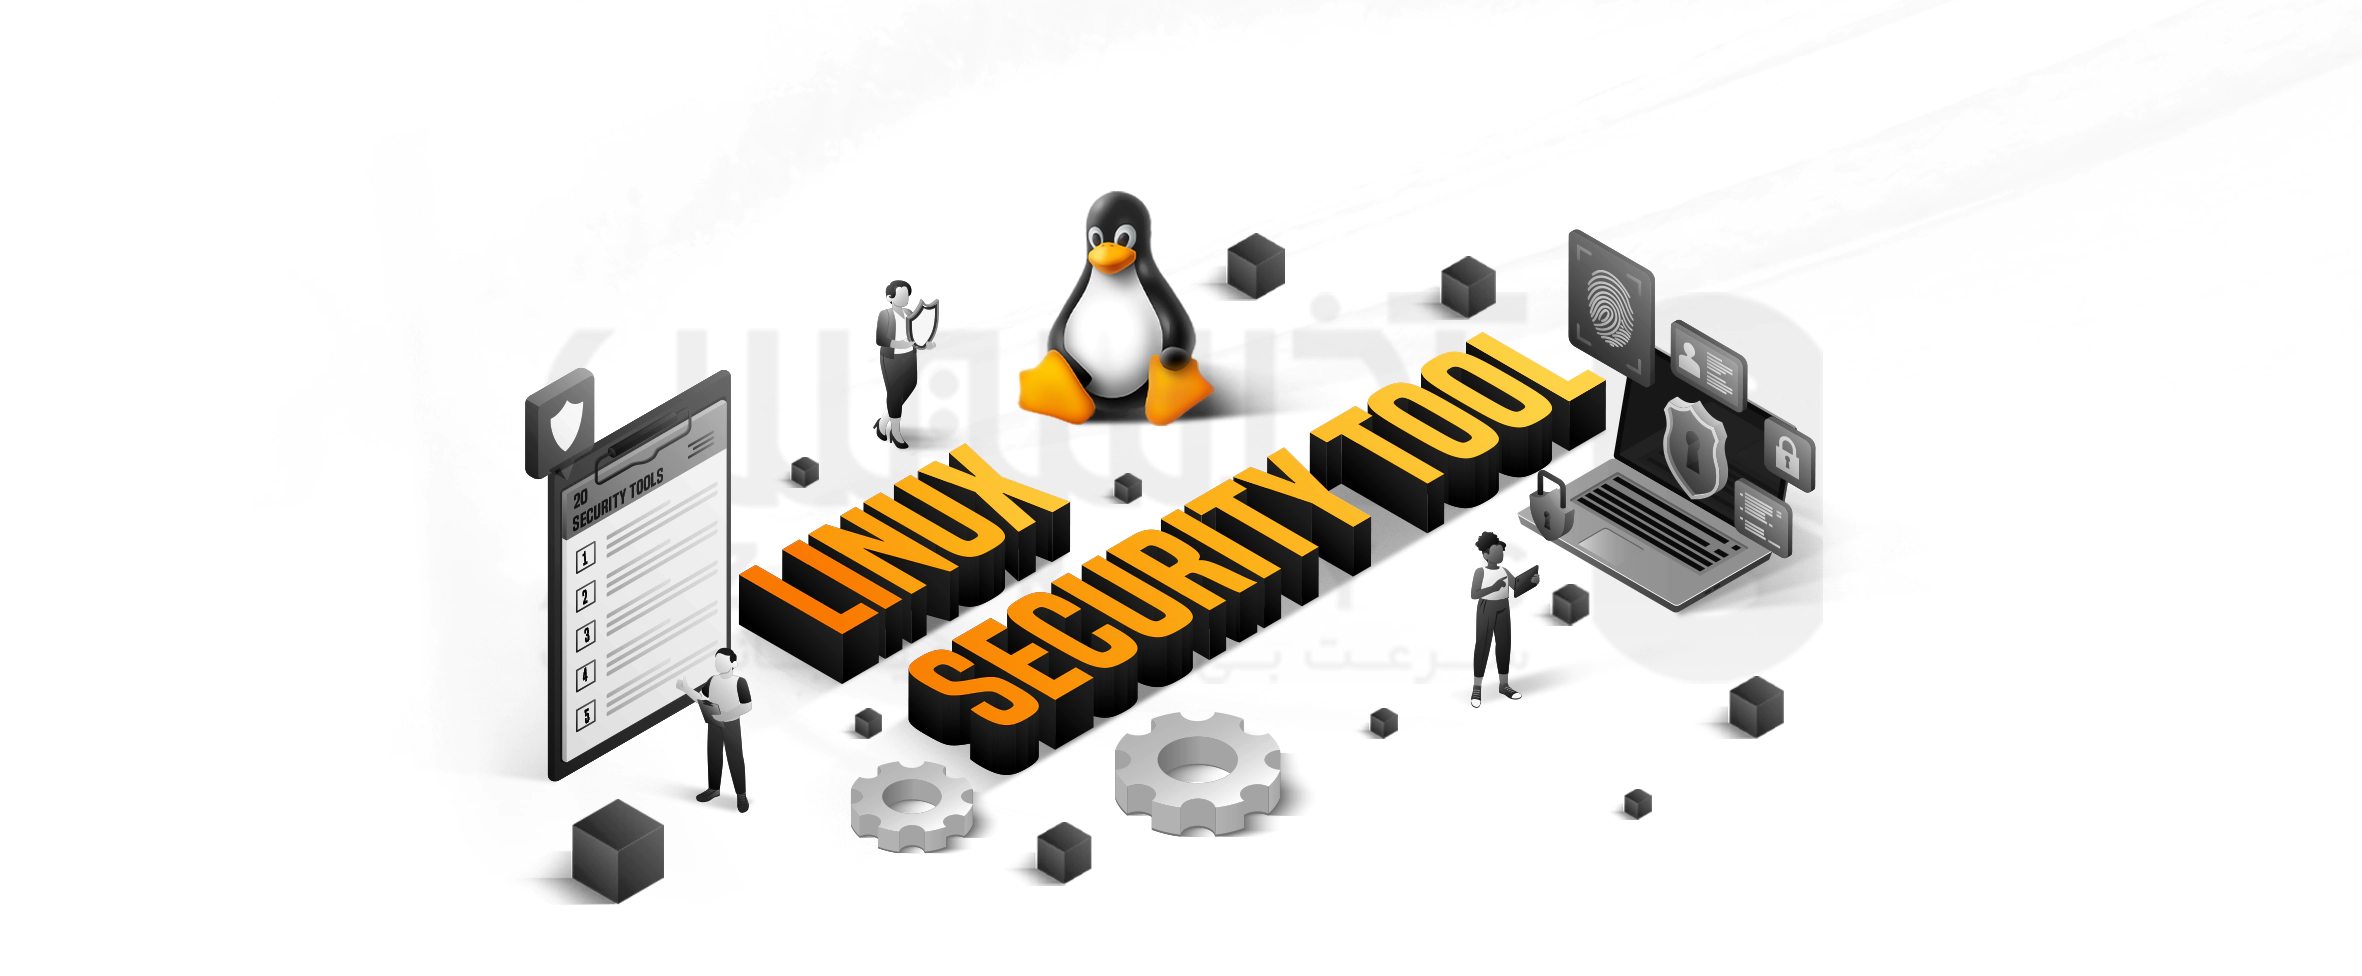 20 Security Tools for Linux System Administrators